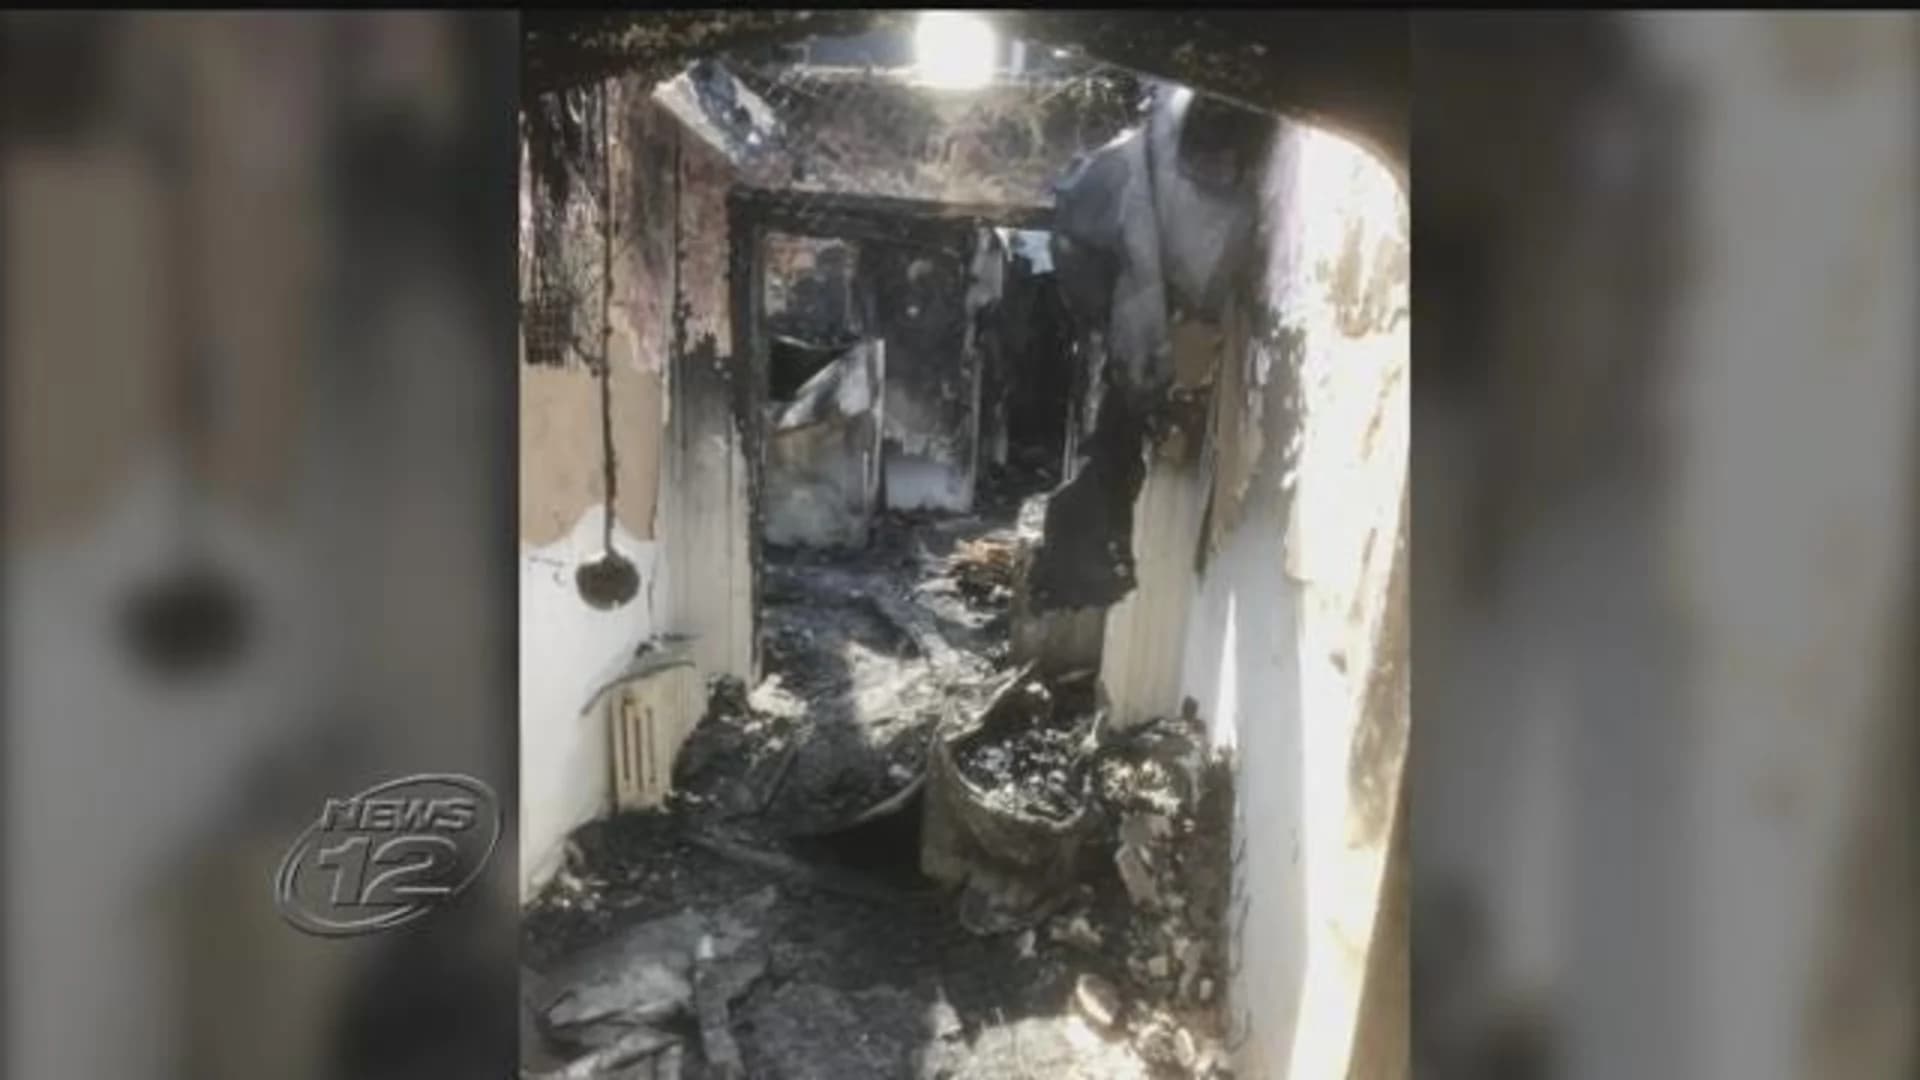 Firefighter photos reveal twisted, mangled, charred debris at Yonkers apartment complex